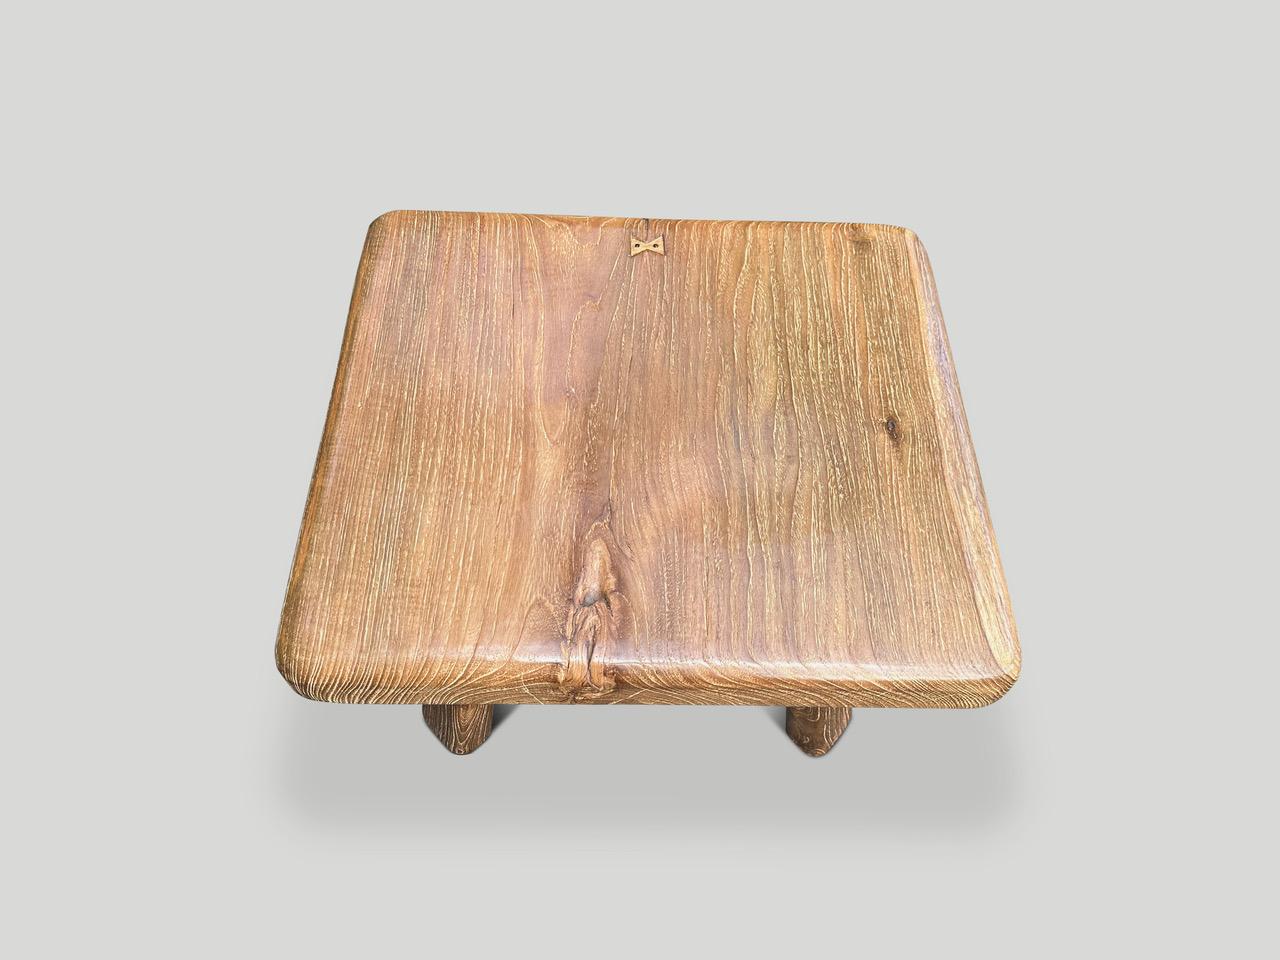 The Mid-Century Couture Collection. Furniture constructed by hand from start to finish. A beautiful reclaimed single slab from my finest collection is hand carved to produce this impressive coffee table. We added mid century style legs to this three